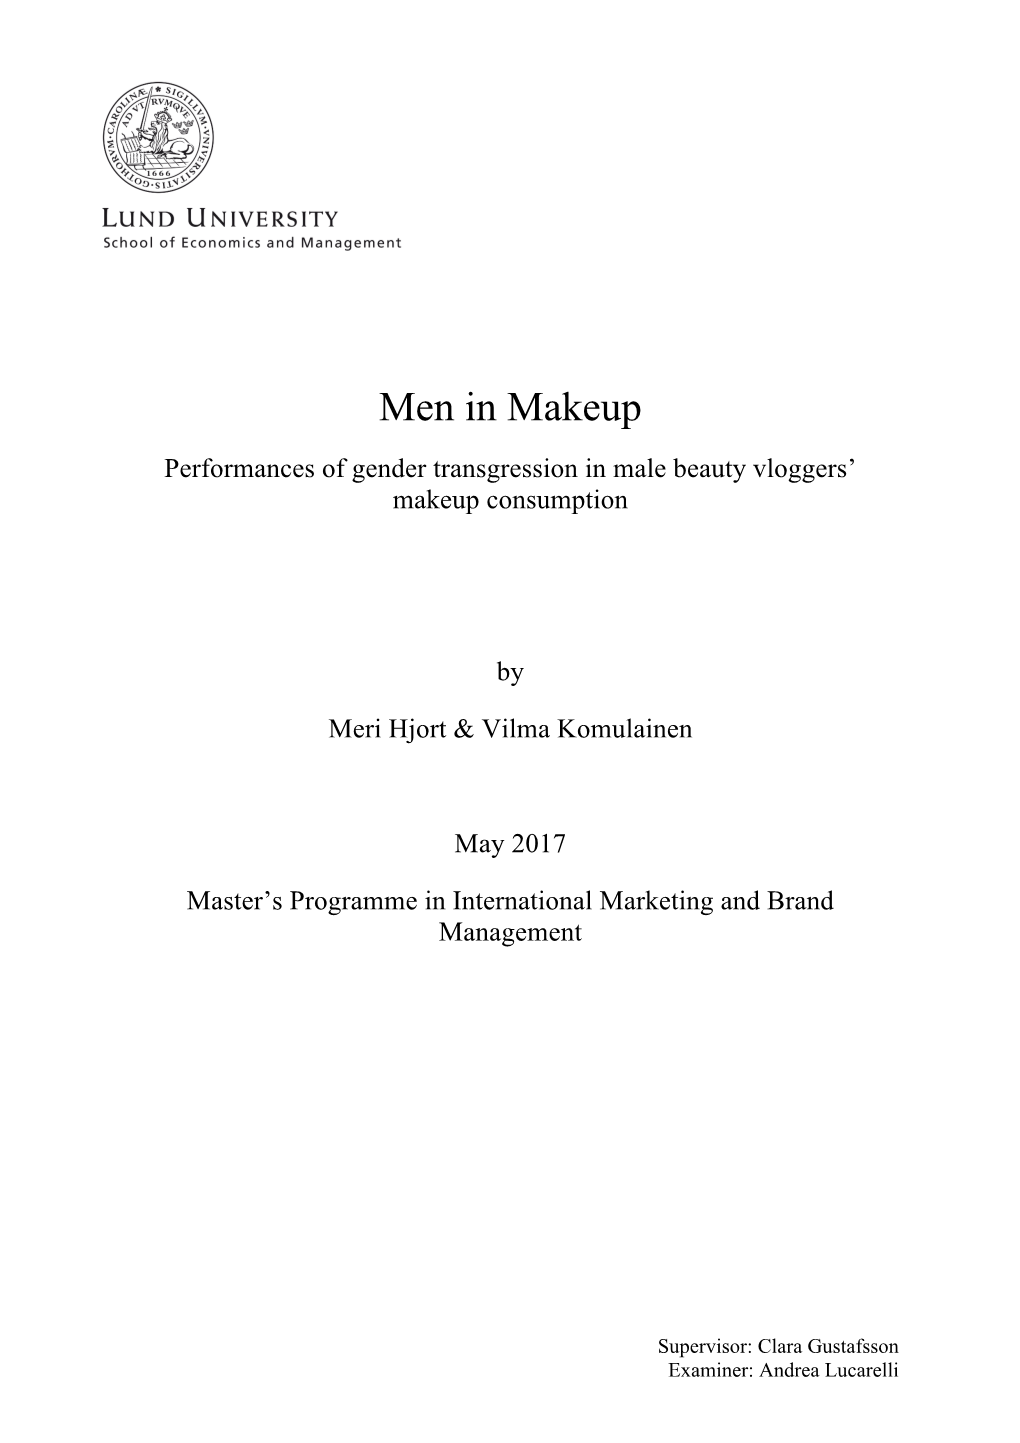 Men in Makeup Performances of Gender Transgression in Male Beauty Vloggers’ Makeup Consumption